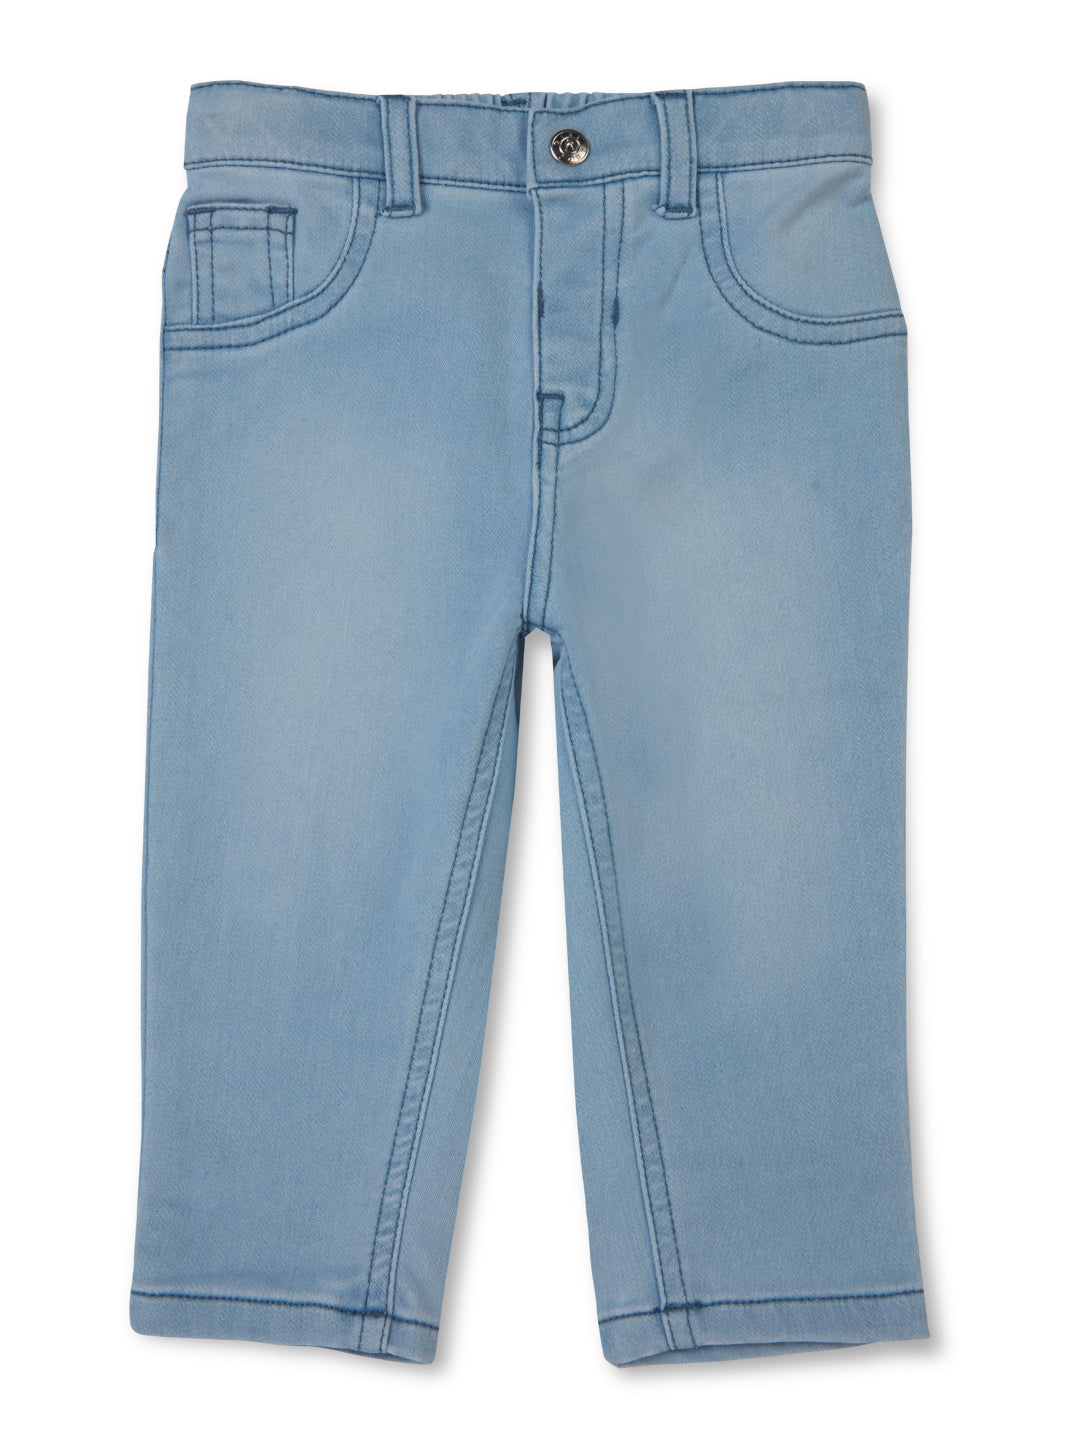 Baby Boys woven blue jeans pants